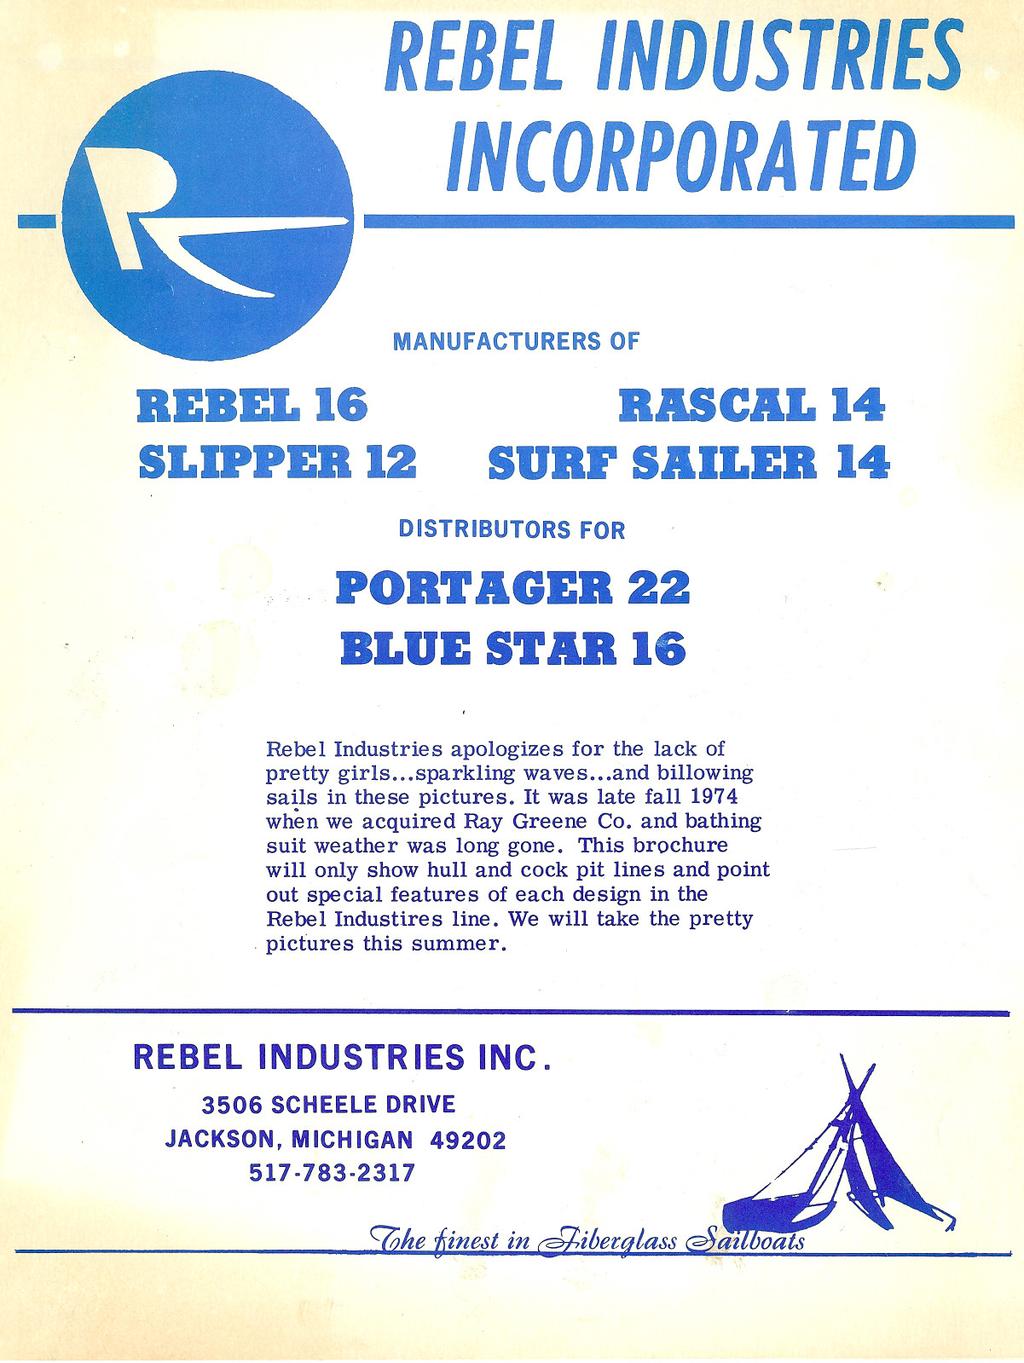 REBEL INDUSTRIES - INCORPORA TED REBEL 16 SLIPPER 12 MANUFACTURERS OF RASCAL 14 SURF SAILER 14 D ISTR IBUTORS FOR PORTAGER22 BLUE STAR 16 Rebel Industries apologizes for the lack of pretty girls.